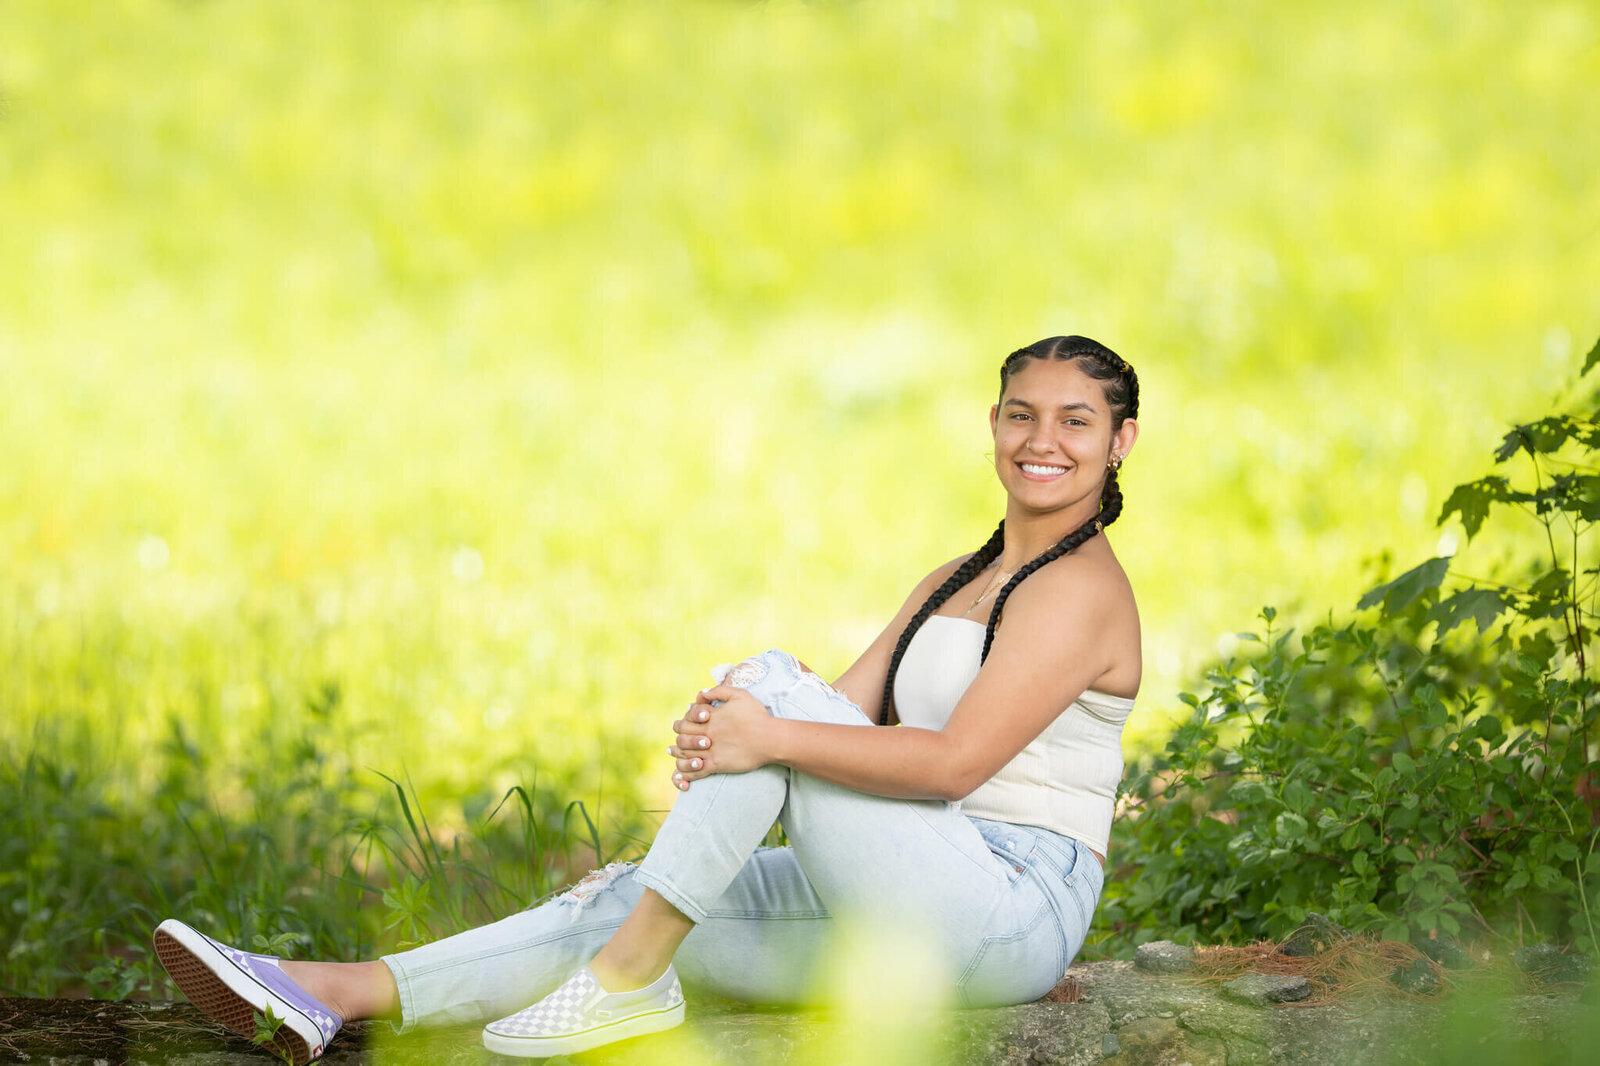 High school senior portrait photography in Clinton MA  of female in a white top smiling at the camera while sitting with a green and yellow background